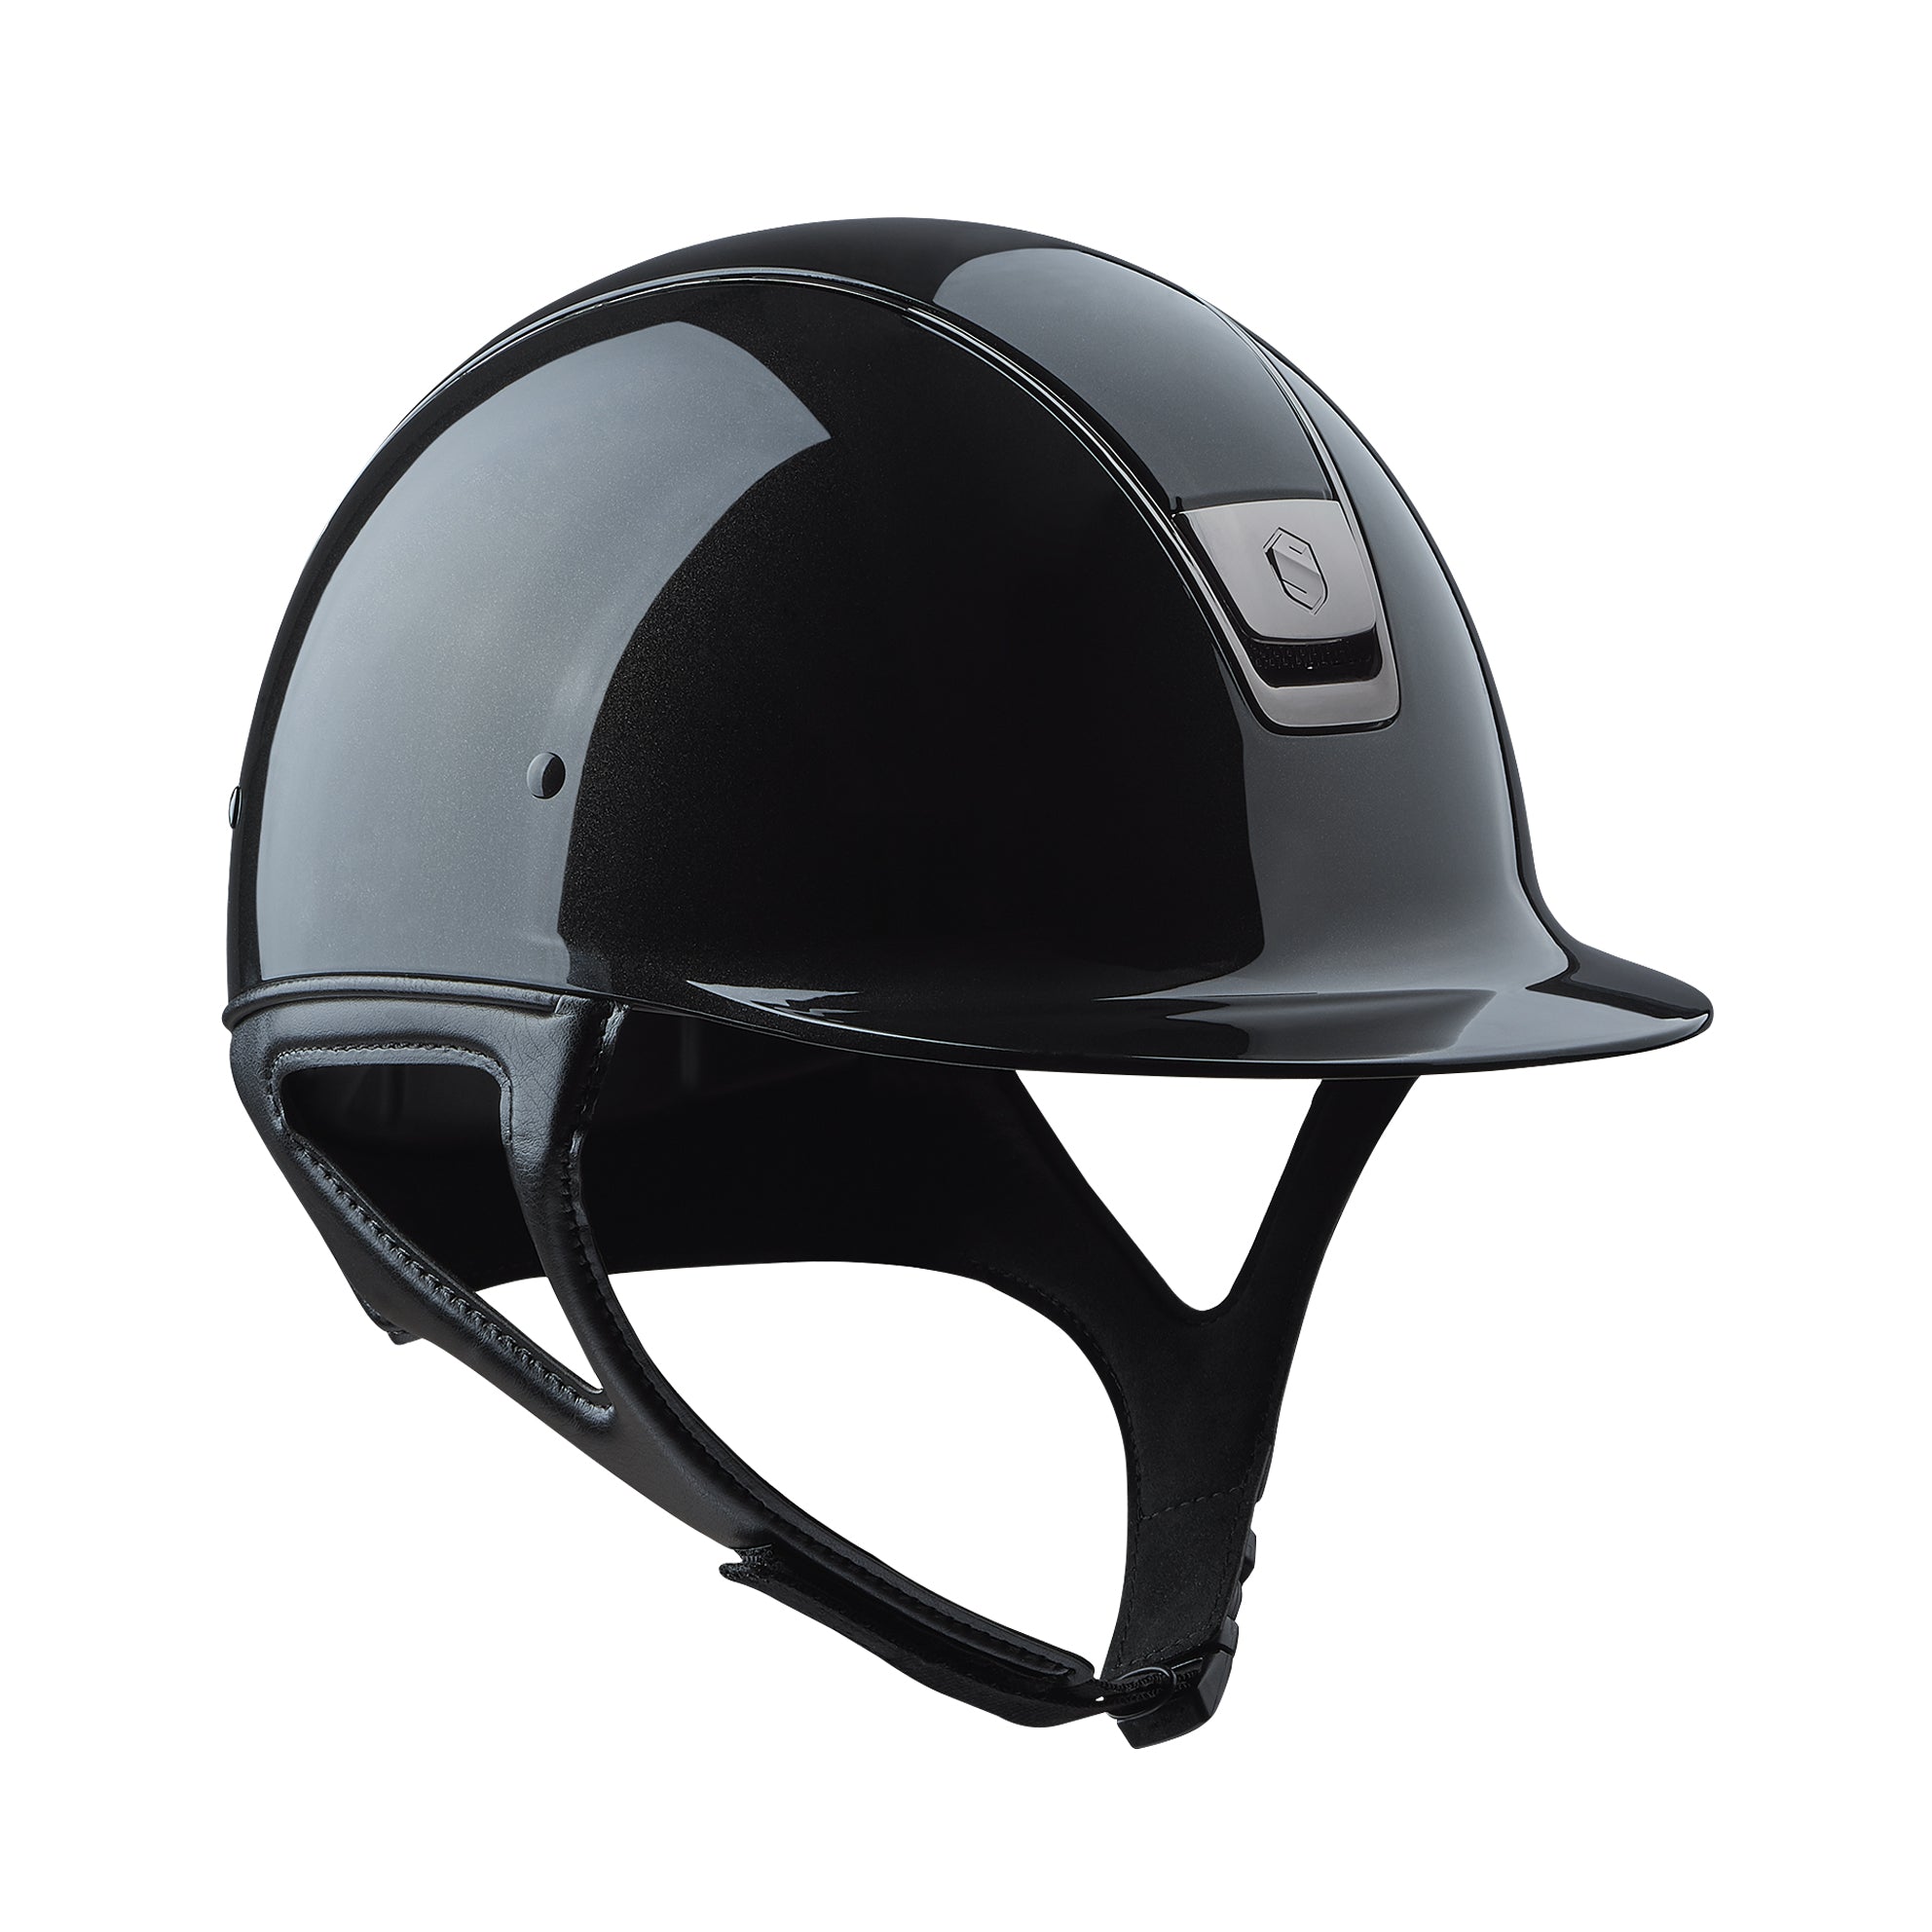 Samshield 1.0 Shadow Glossy Helmet - Black - in stock and ready to ship